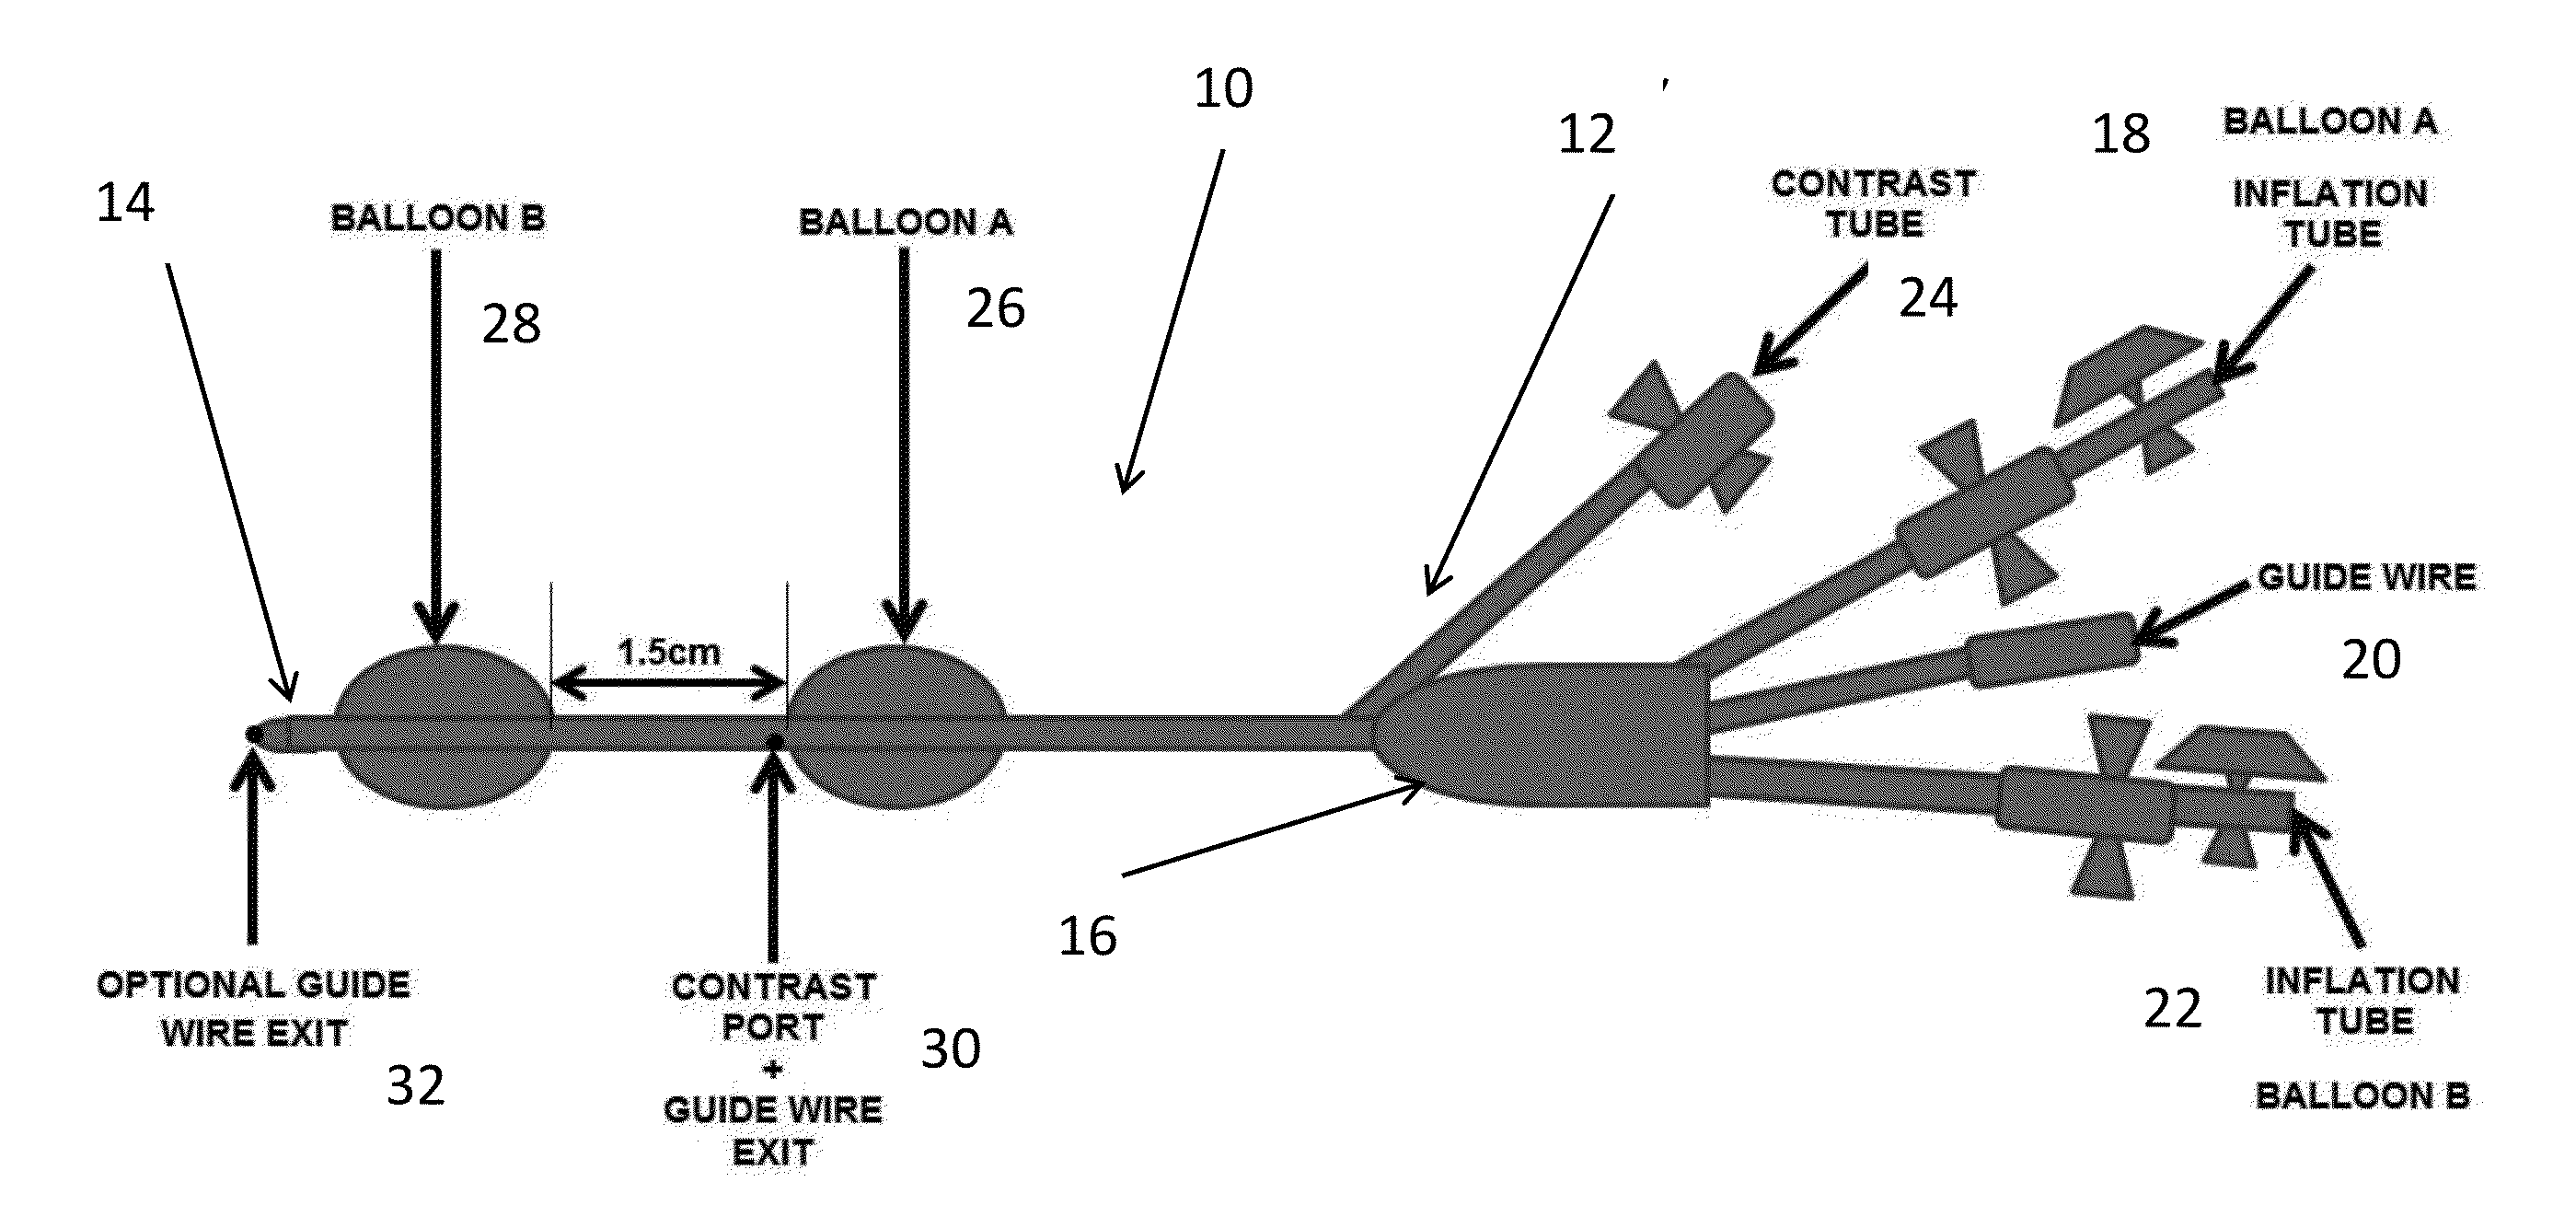 Dual Balloon Biliary Stone Extraction Device